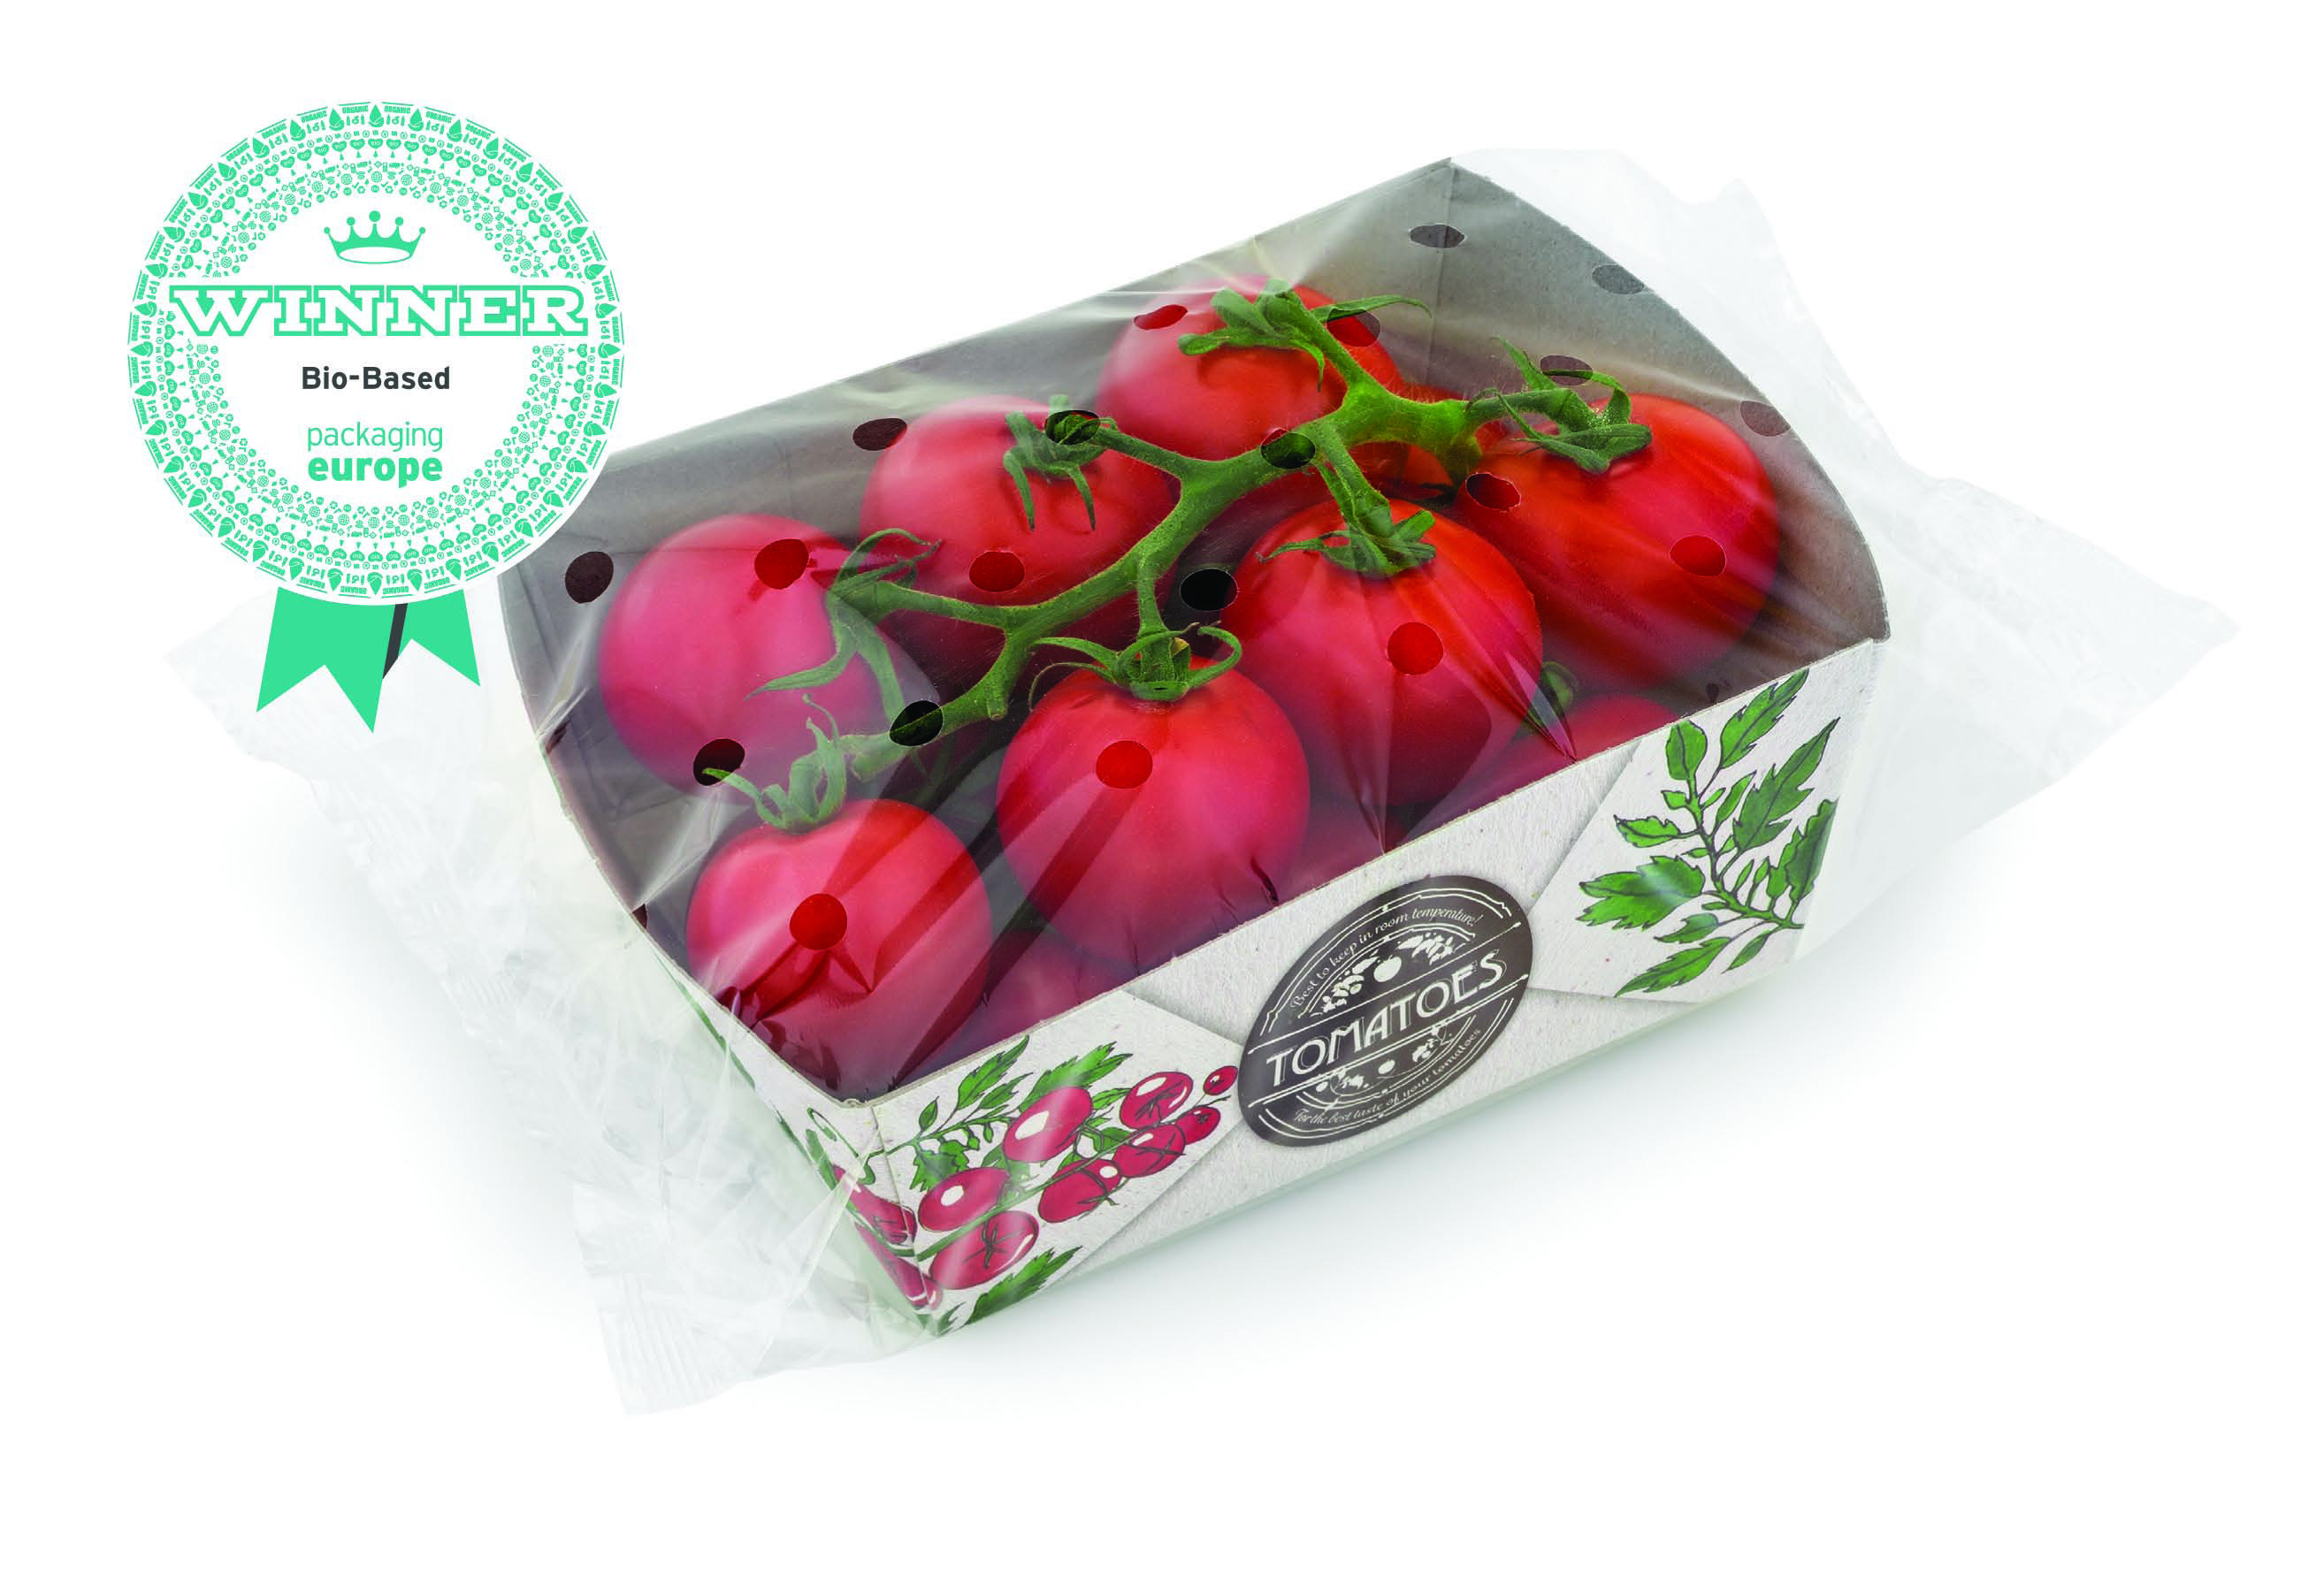 Solid board made of tomato plants wins Packaging Europe Sustainability